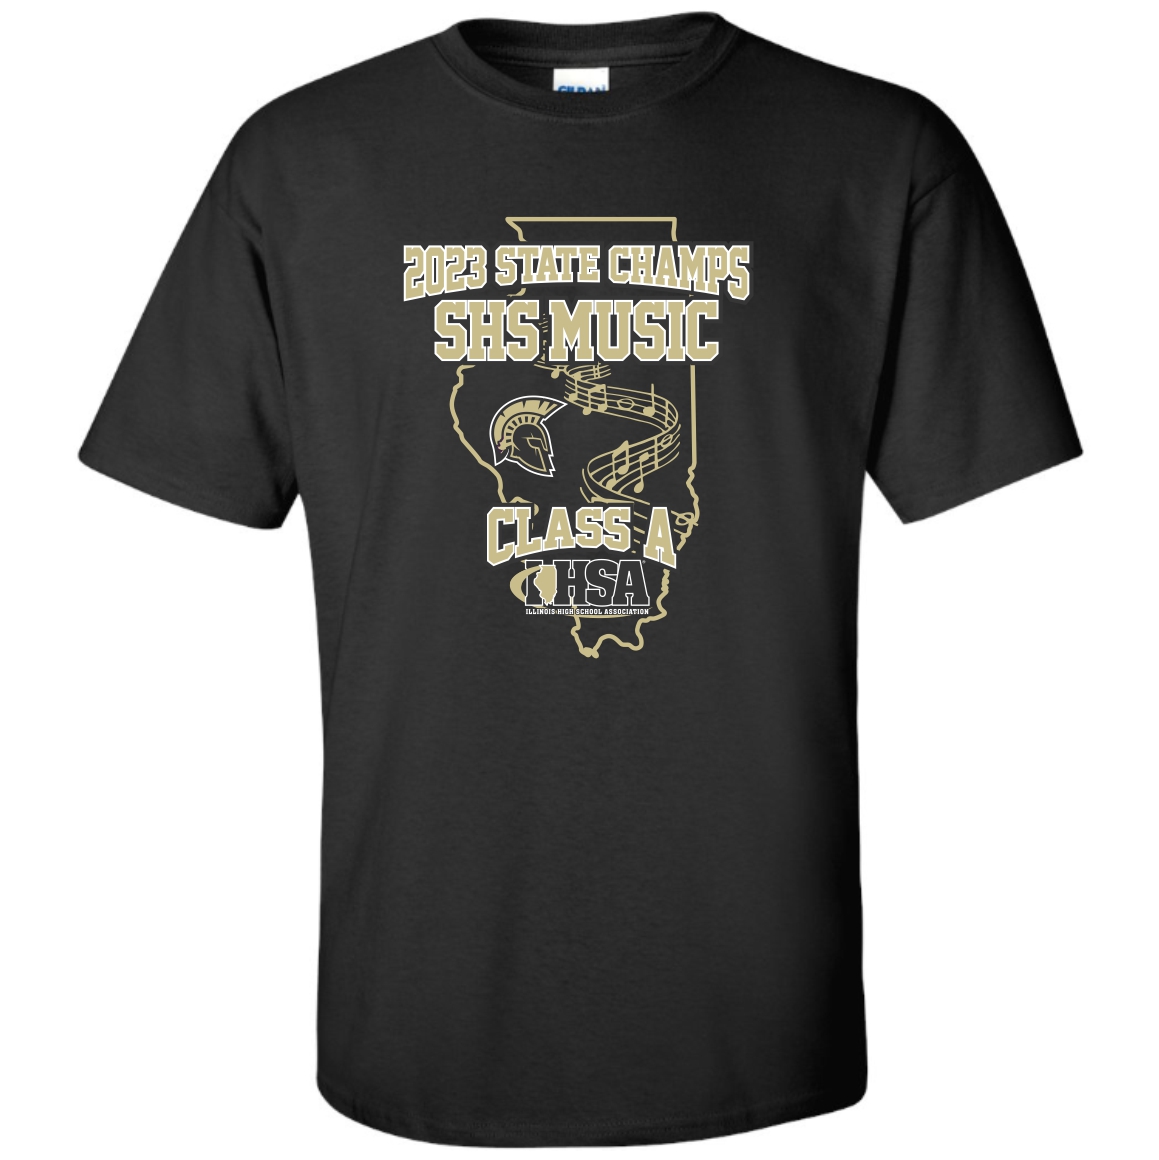 Sycamore Music State Champs – Wakoh Wear Inc